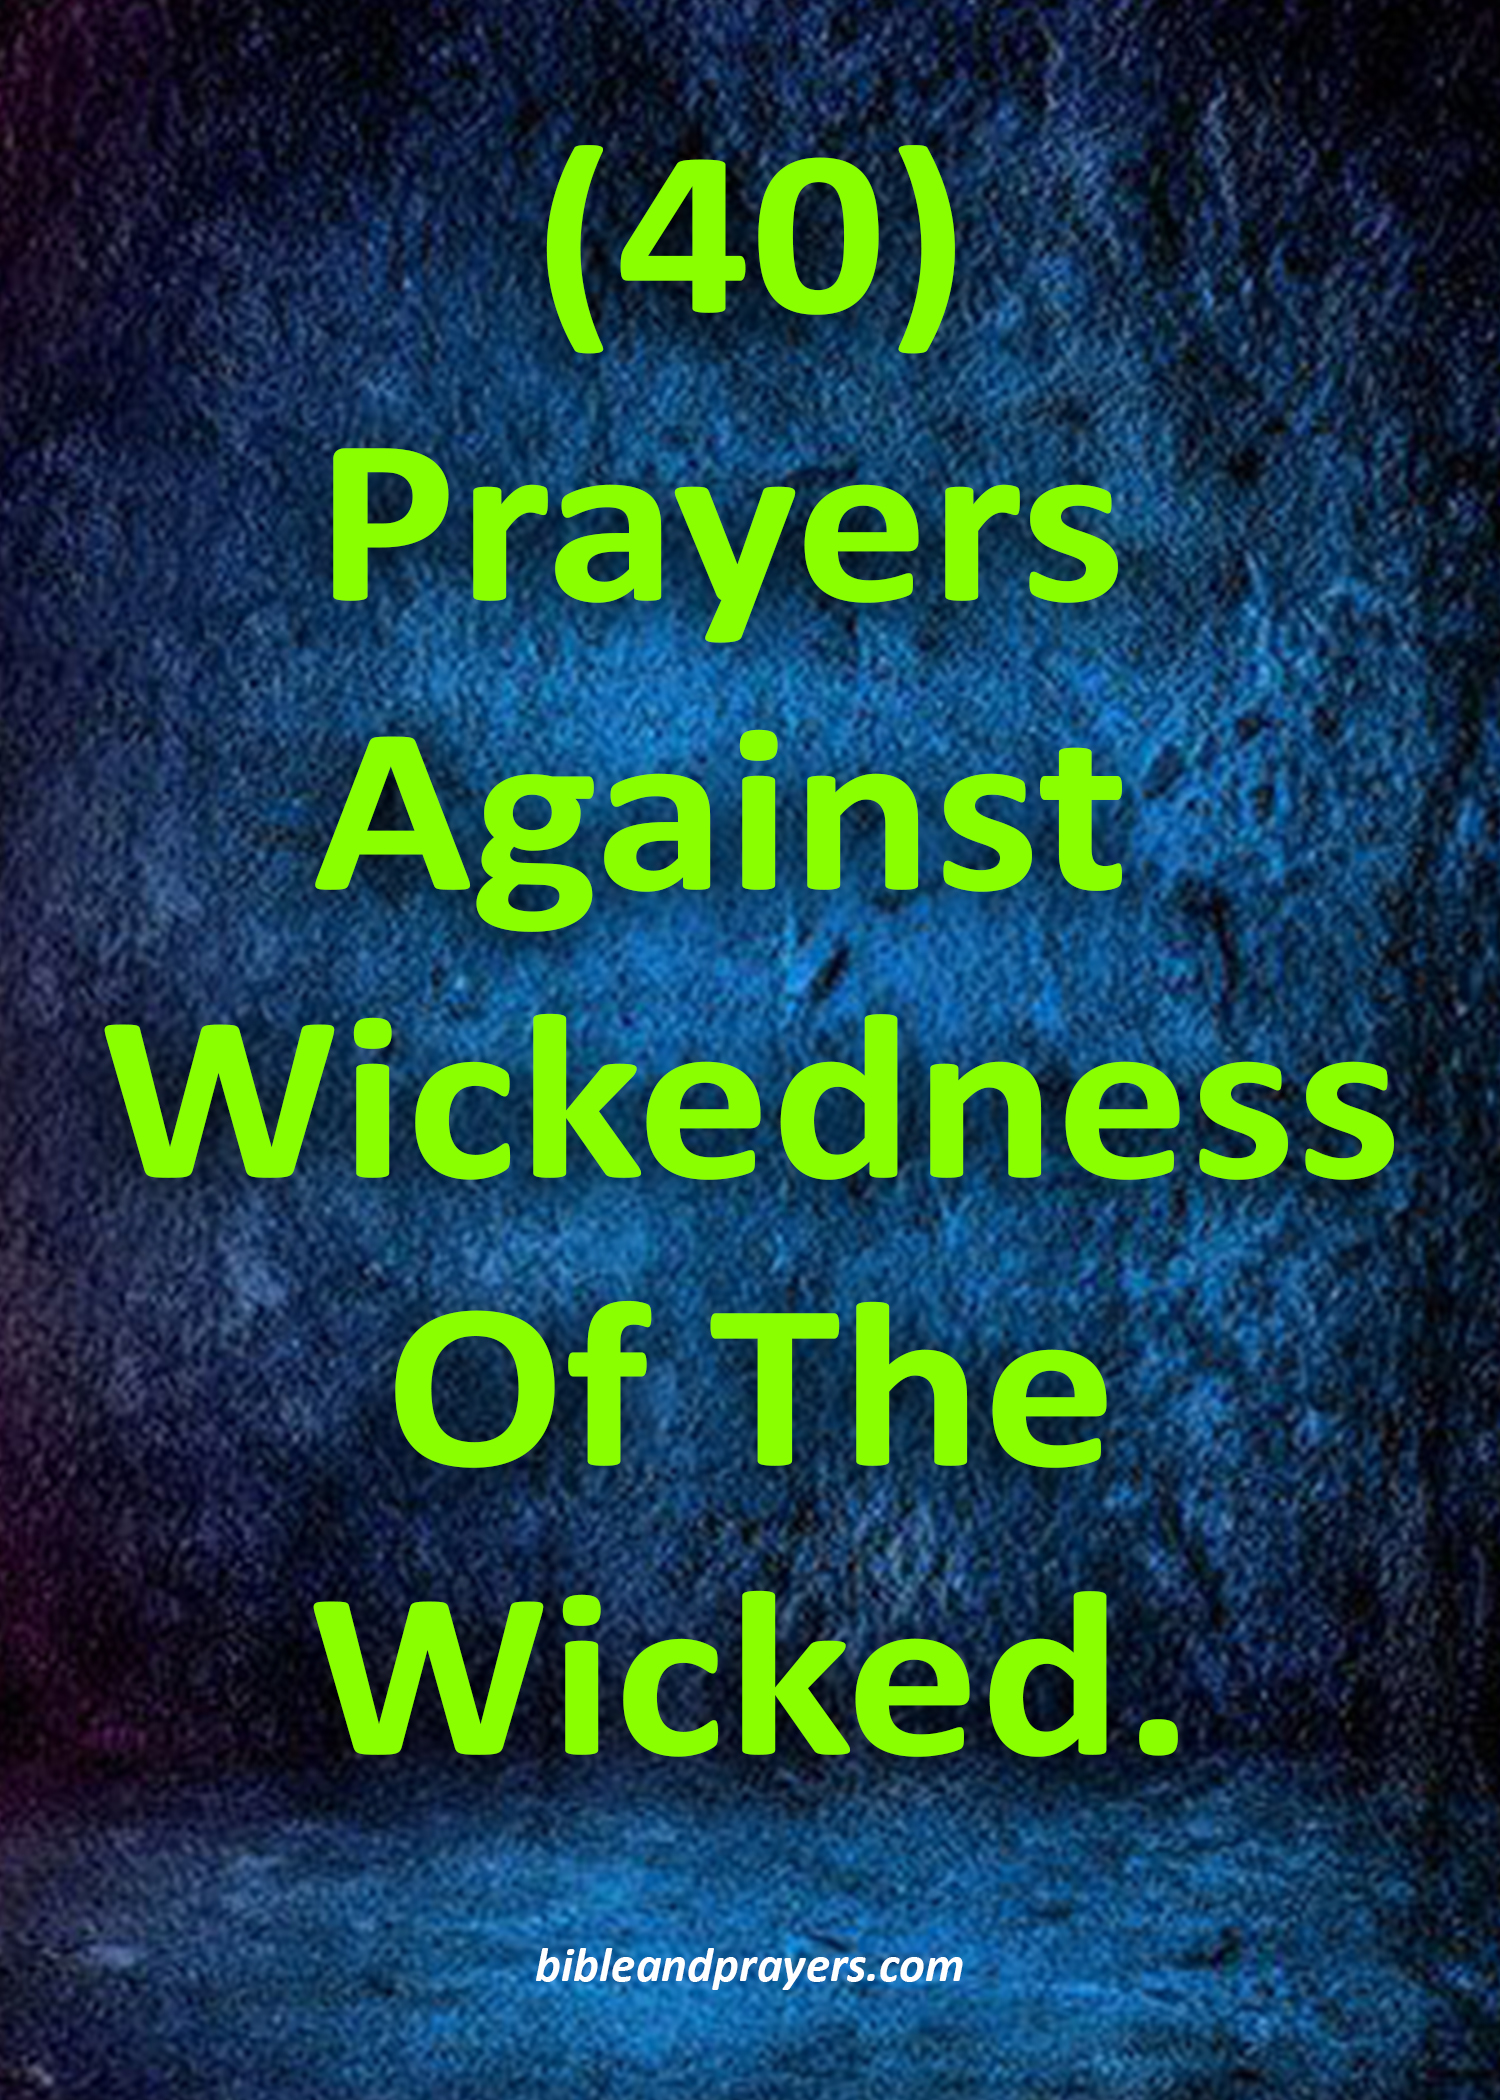 40 Prayers Against Wickedness Of The Wicked